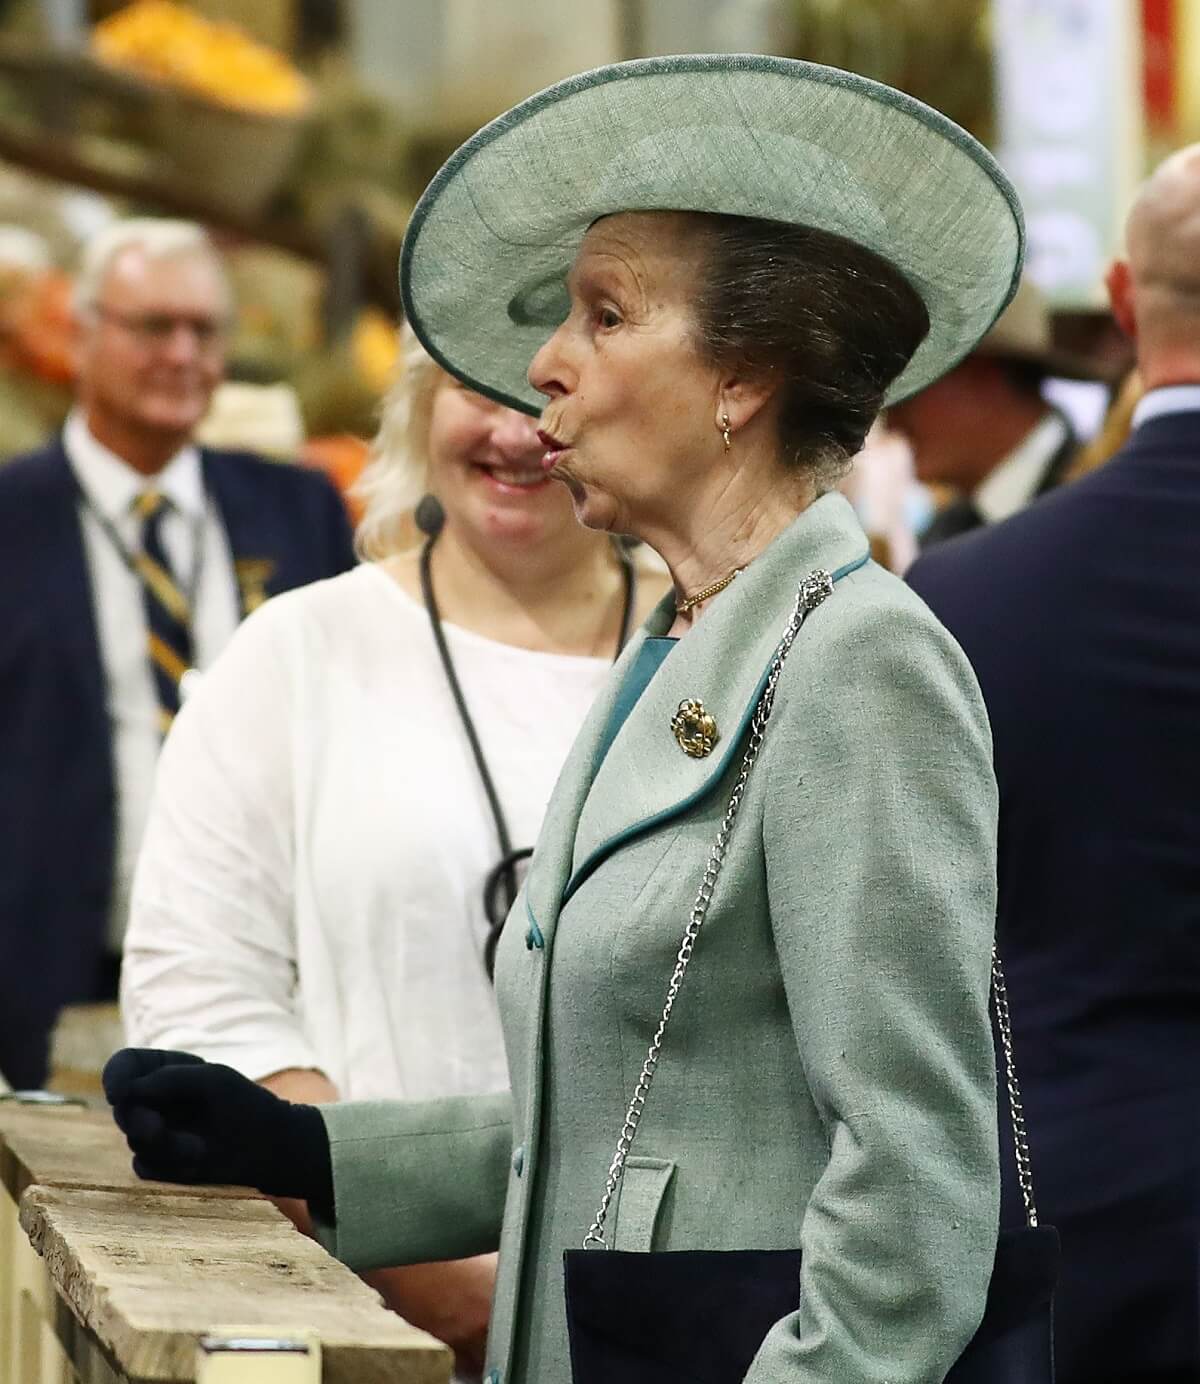 Princess Anne views stands at the Bicentennial Sydney Royal Easter Show